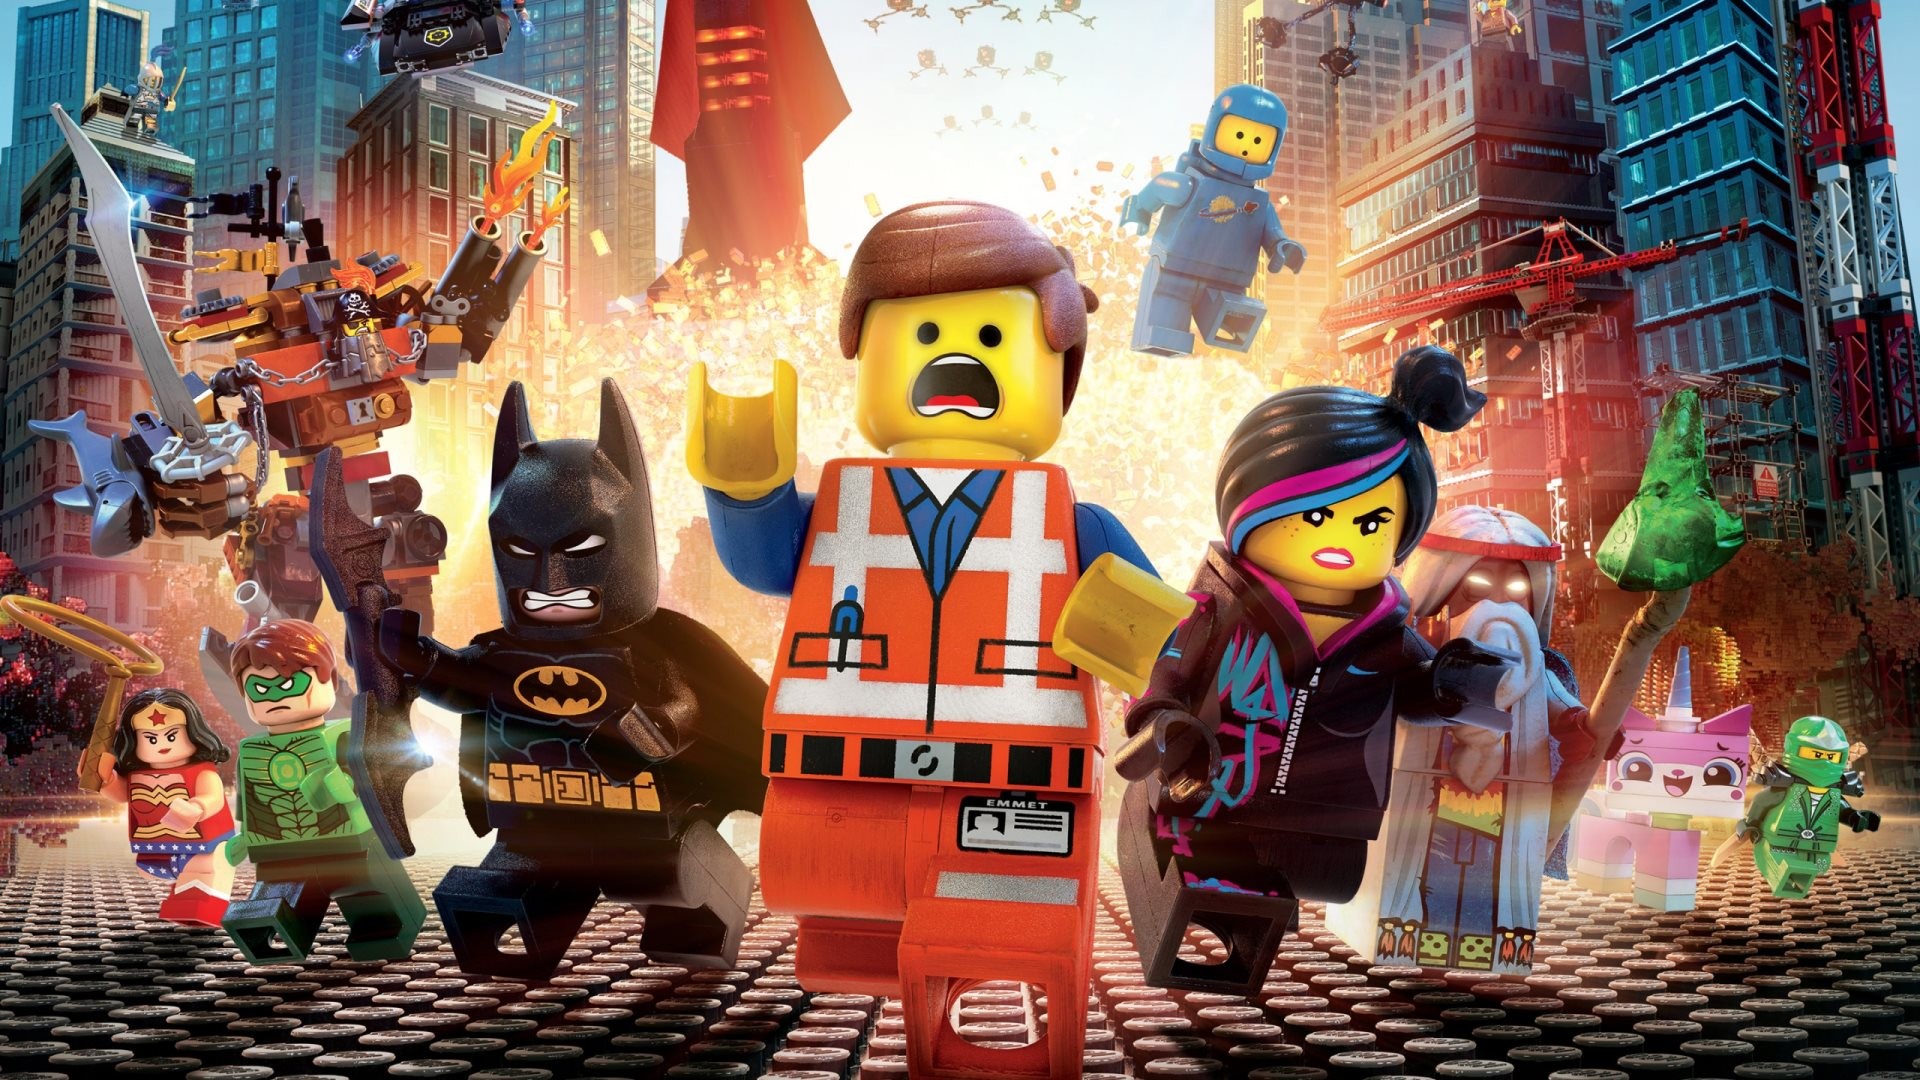 1920x1080 12 Vitruvius (Lego Movie) HD Wallpapers | Backgrounds - Wallpaper Abyss